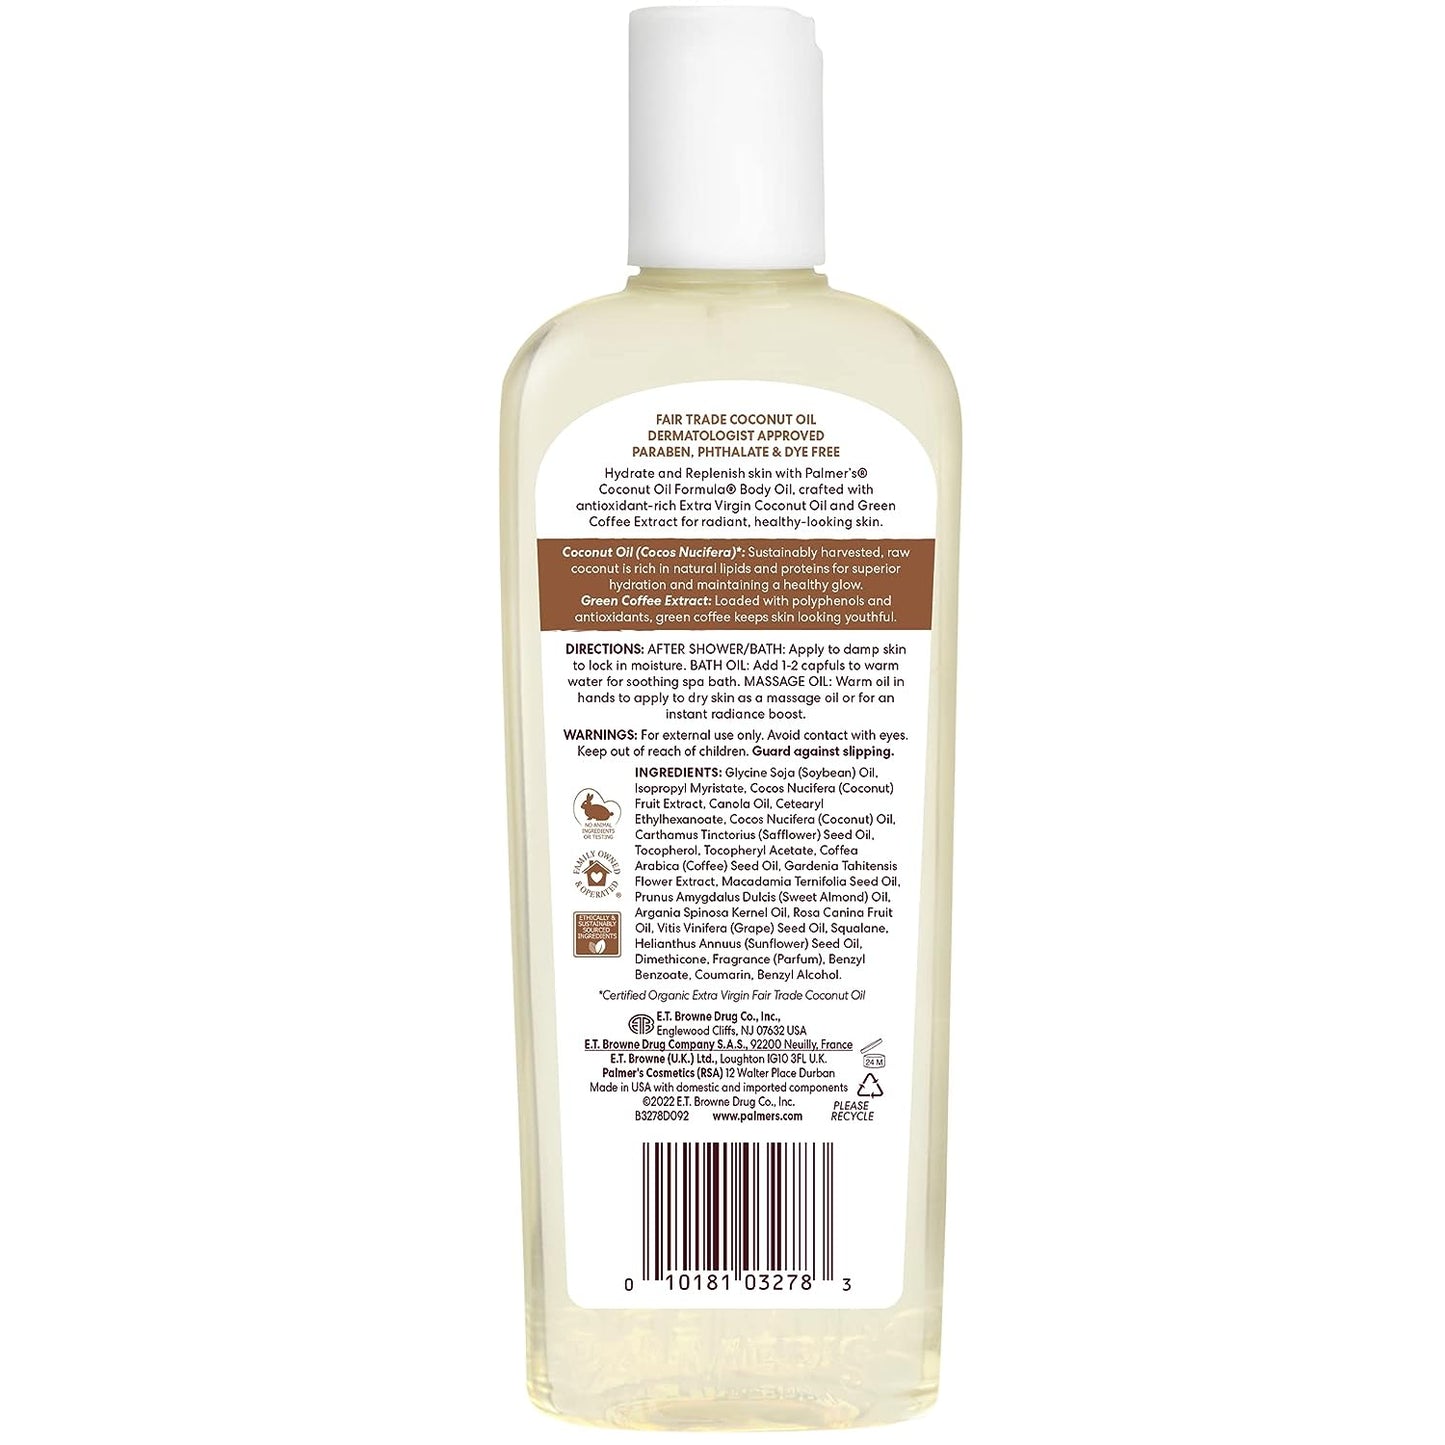 PALMERS COCONUT OIL WITH VITAMIN E - COCNUT HYDRATE BODY OIL WITH RADIANCE ENHANCING BLENDS OF OILS